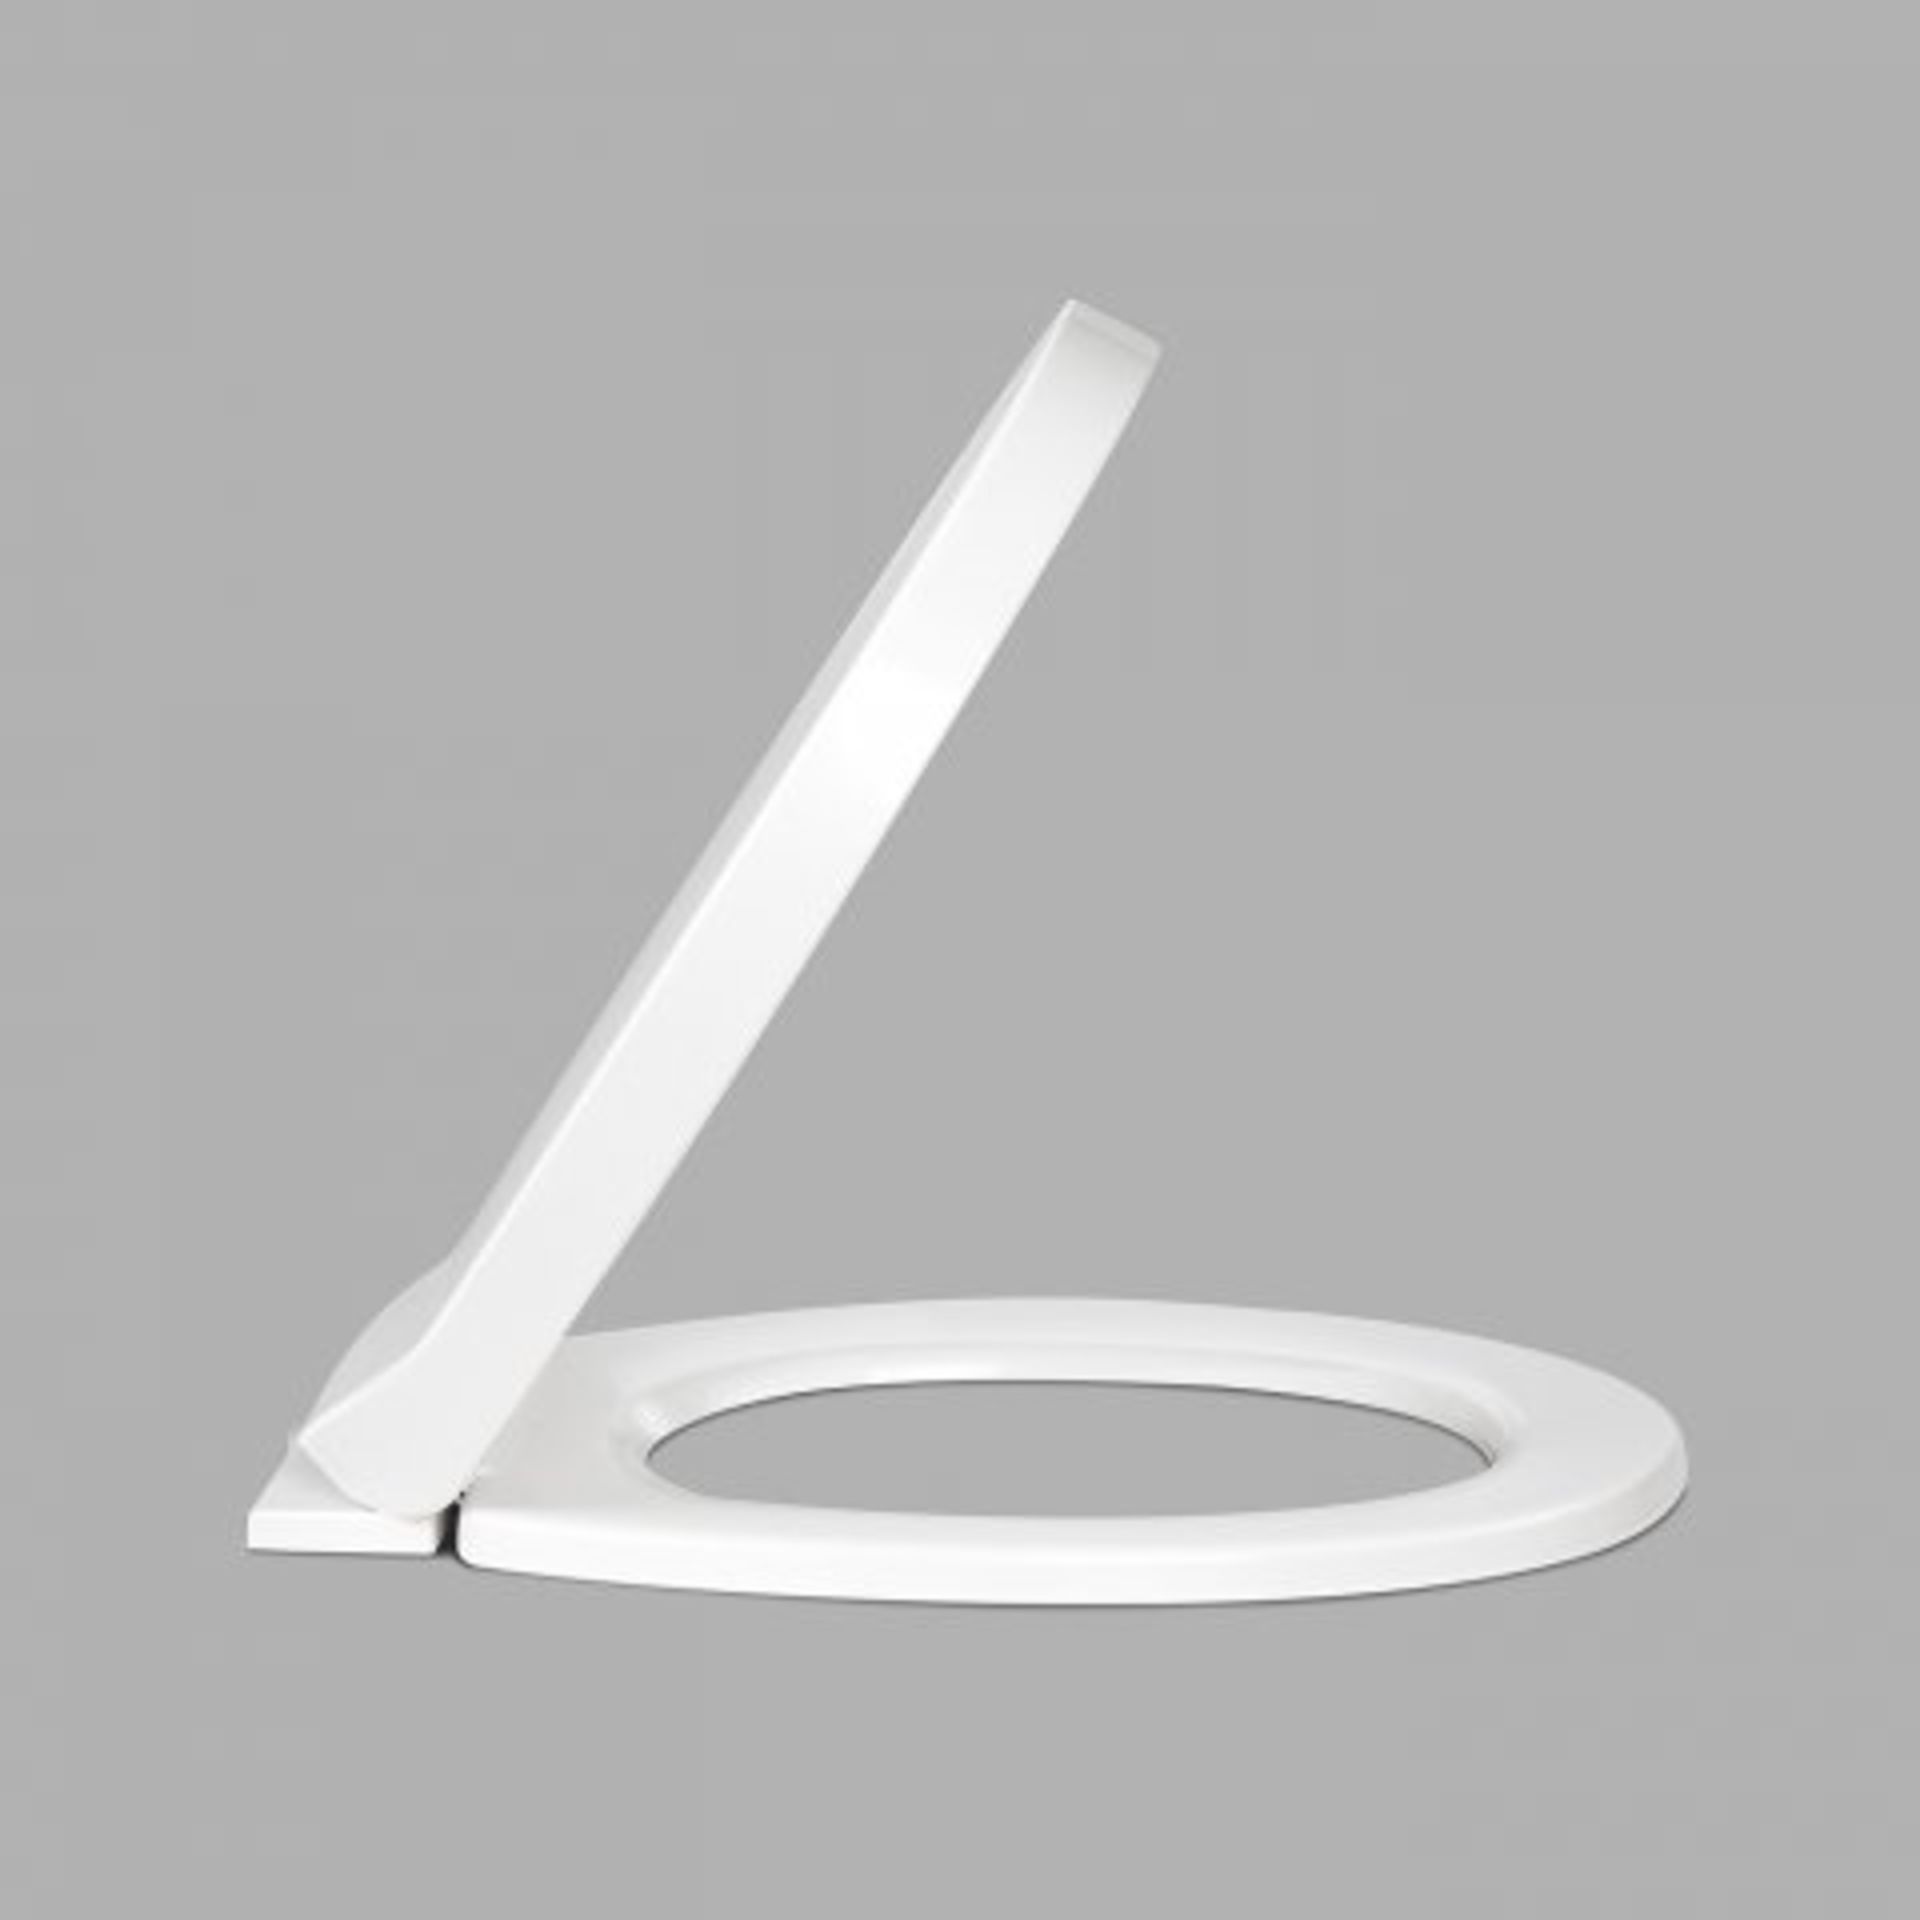 (N69) Crosby Toilet Seat - Soft Closing Our luxury Crosby Soft Close Toilet Seat is provided with - Image 2 of 2